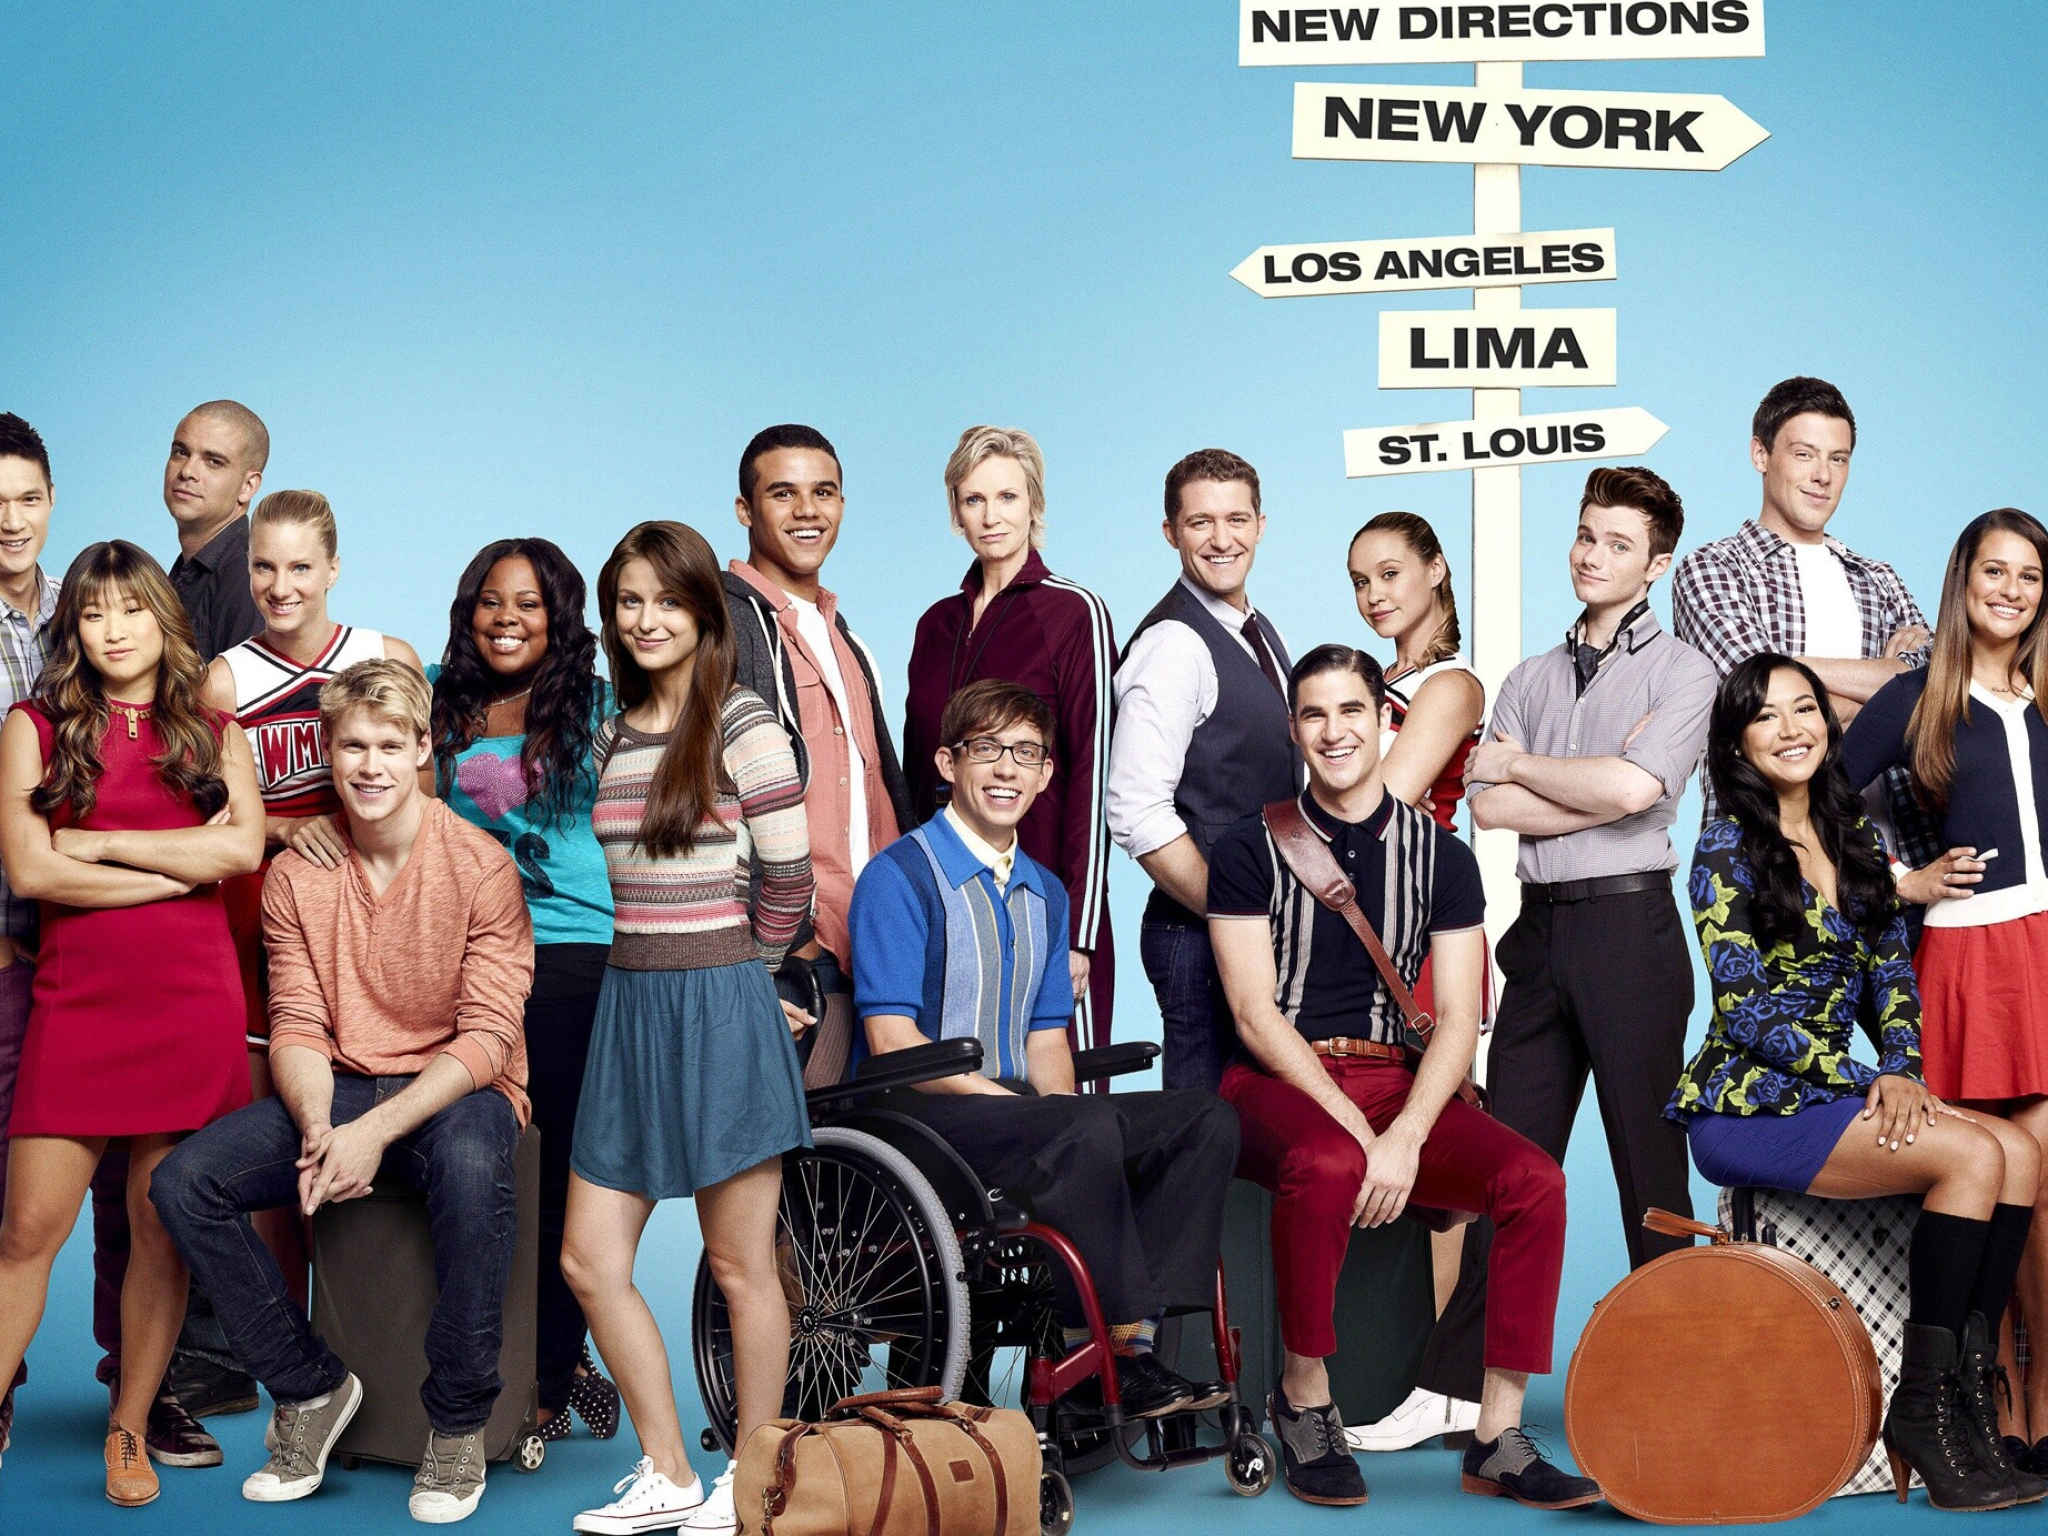 Glee (TV series): New Directions, An American musical comedy-drama show, Lima New-York, St. Louis. 2050x1540 HD Background.